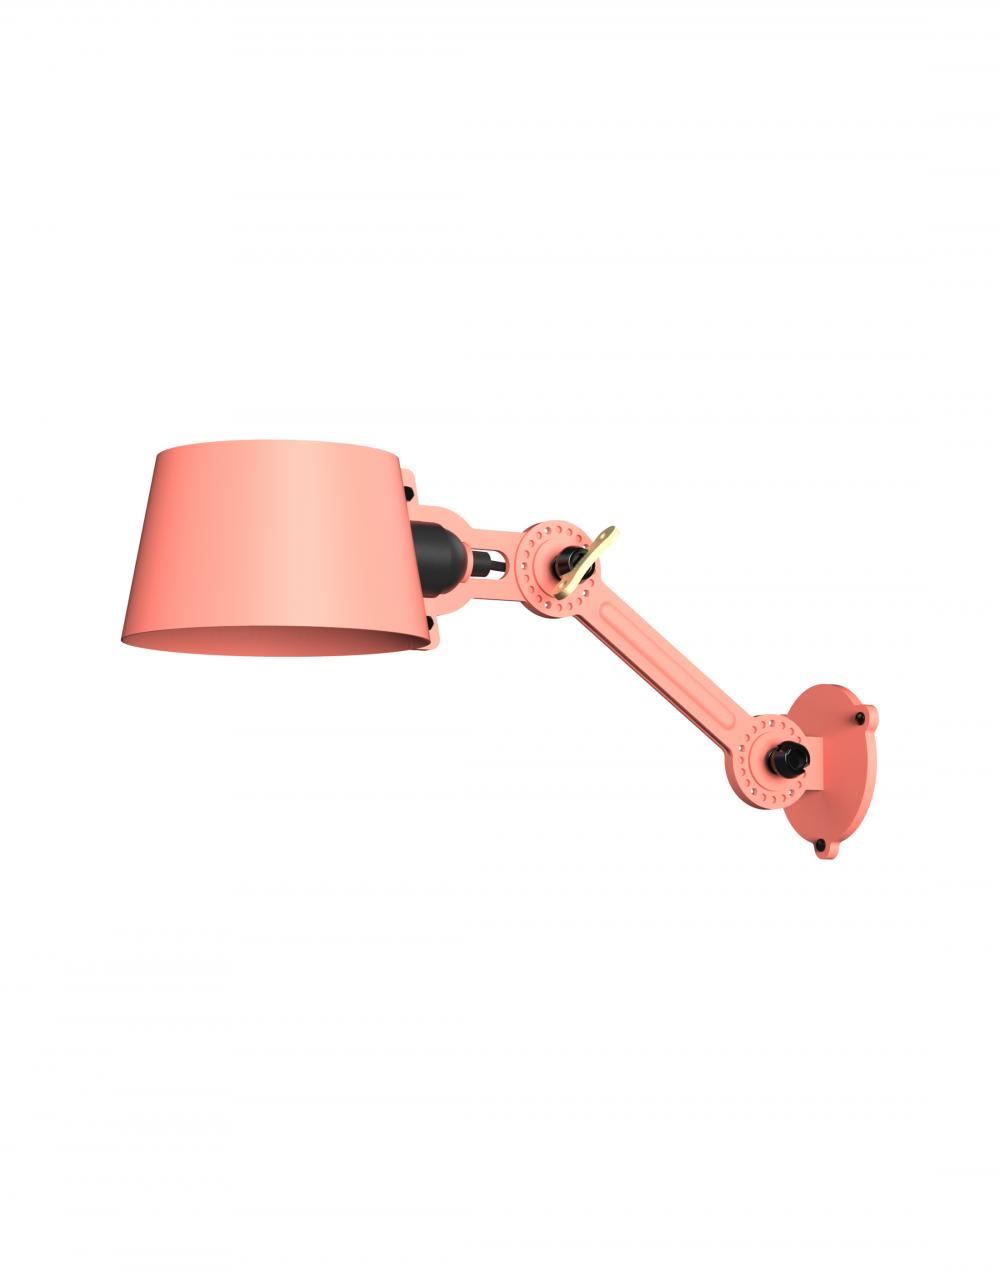 Bolt Wall Lamp Side Fit Small Daybreak Rose Hardwired For Cables From Wall